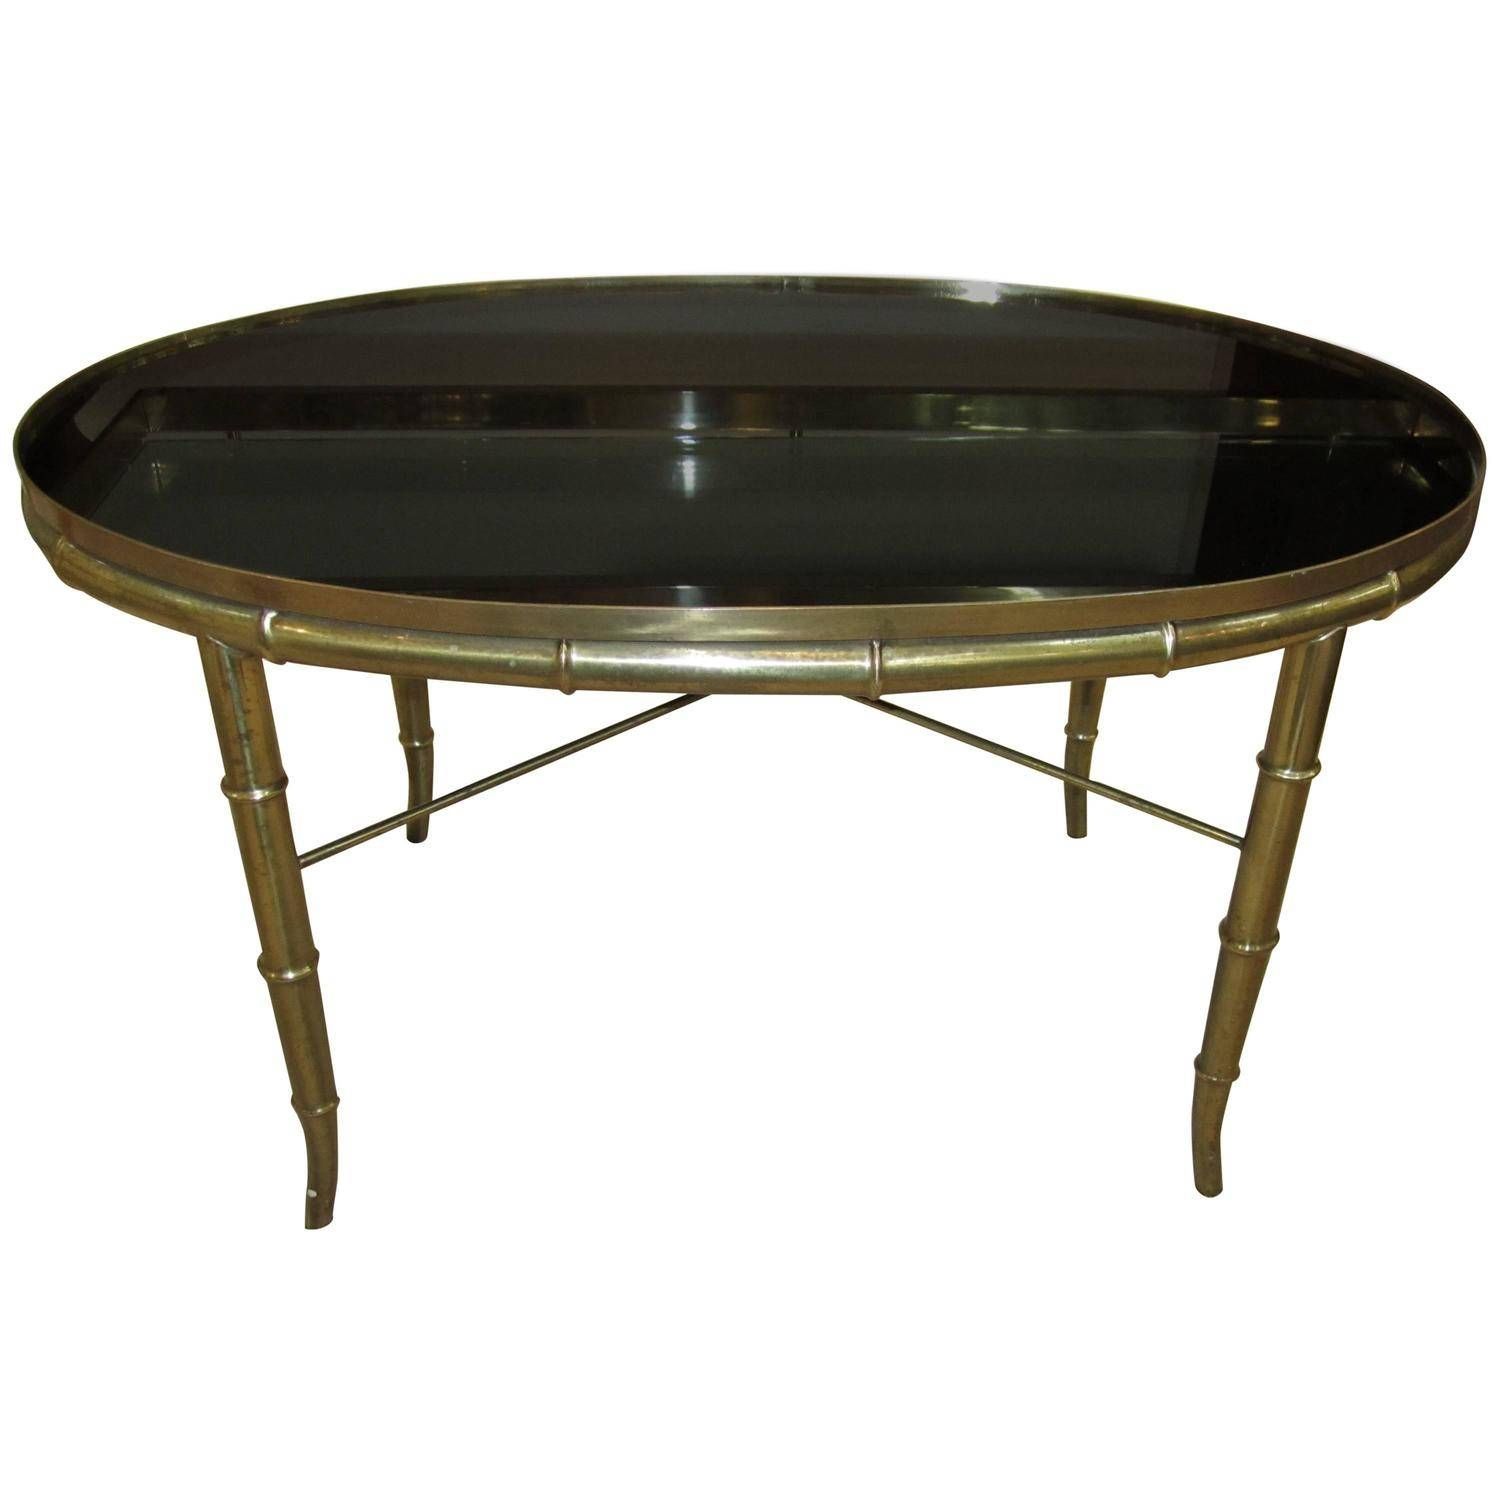 Mirror Side Tables – 211 For Sale At 1stdibs With Regard To Vintage Mirror Coffee Tables (View 24 of 30)